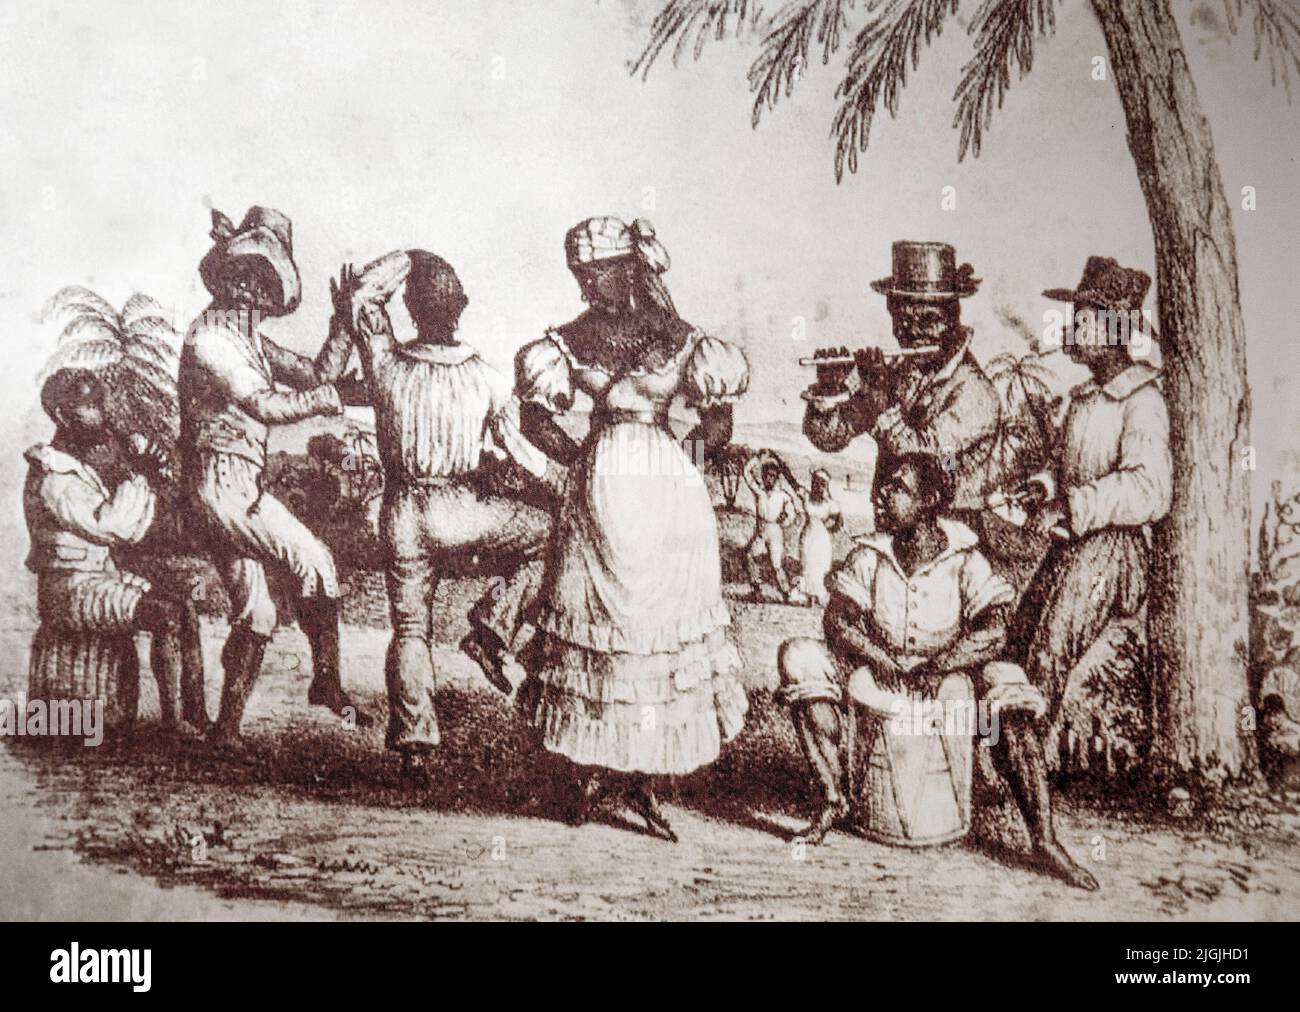 Jamaica, Kingston. Institute of Jamaica and the music department of it.Dance and music on the plantation in slavery times Stock Photo